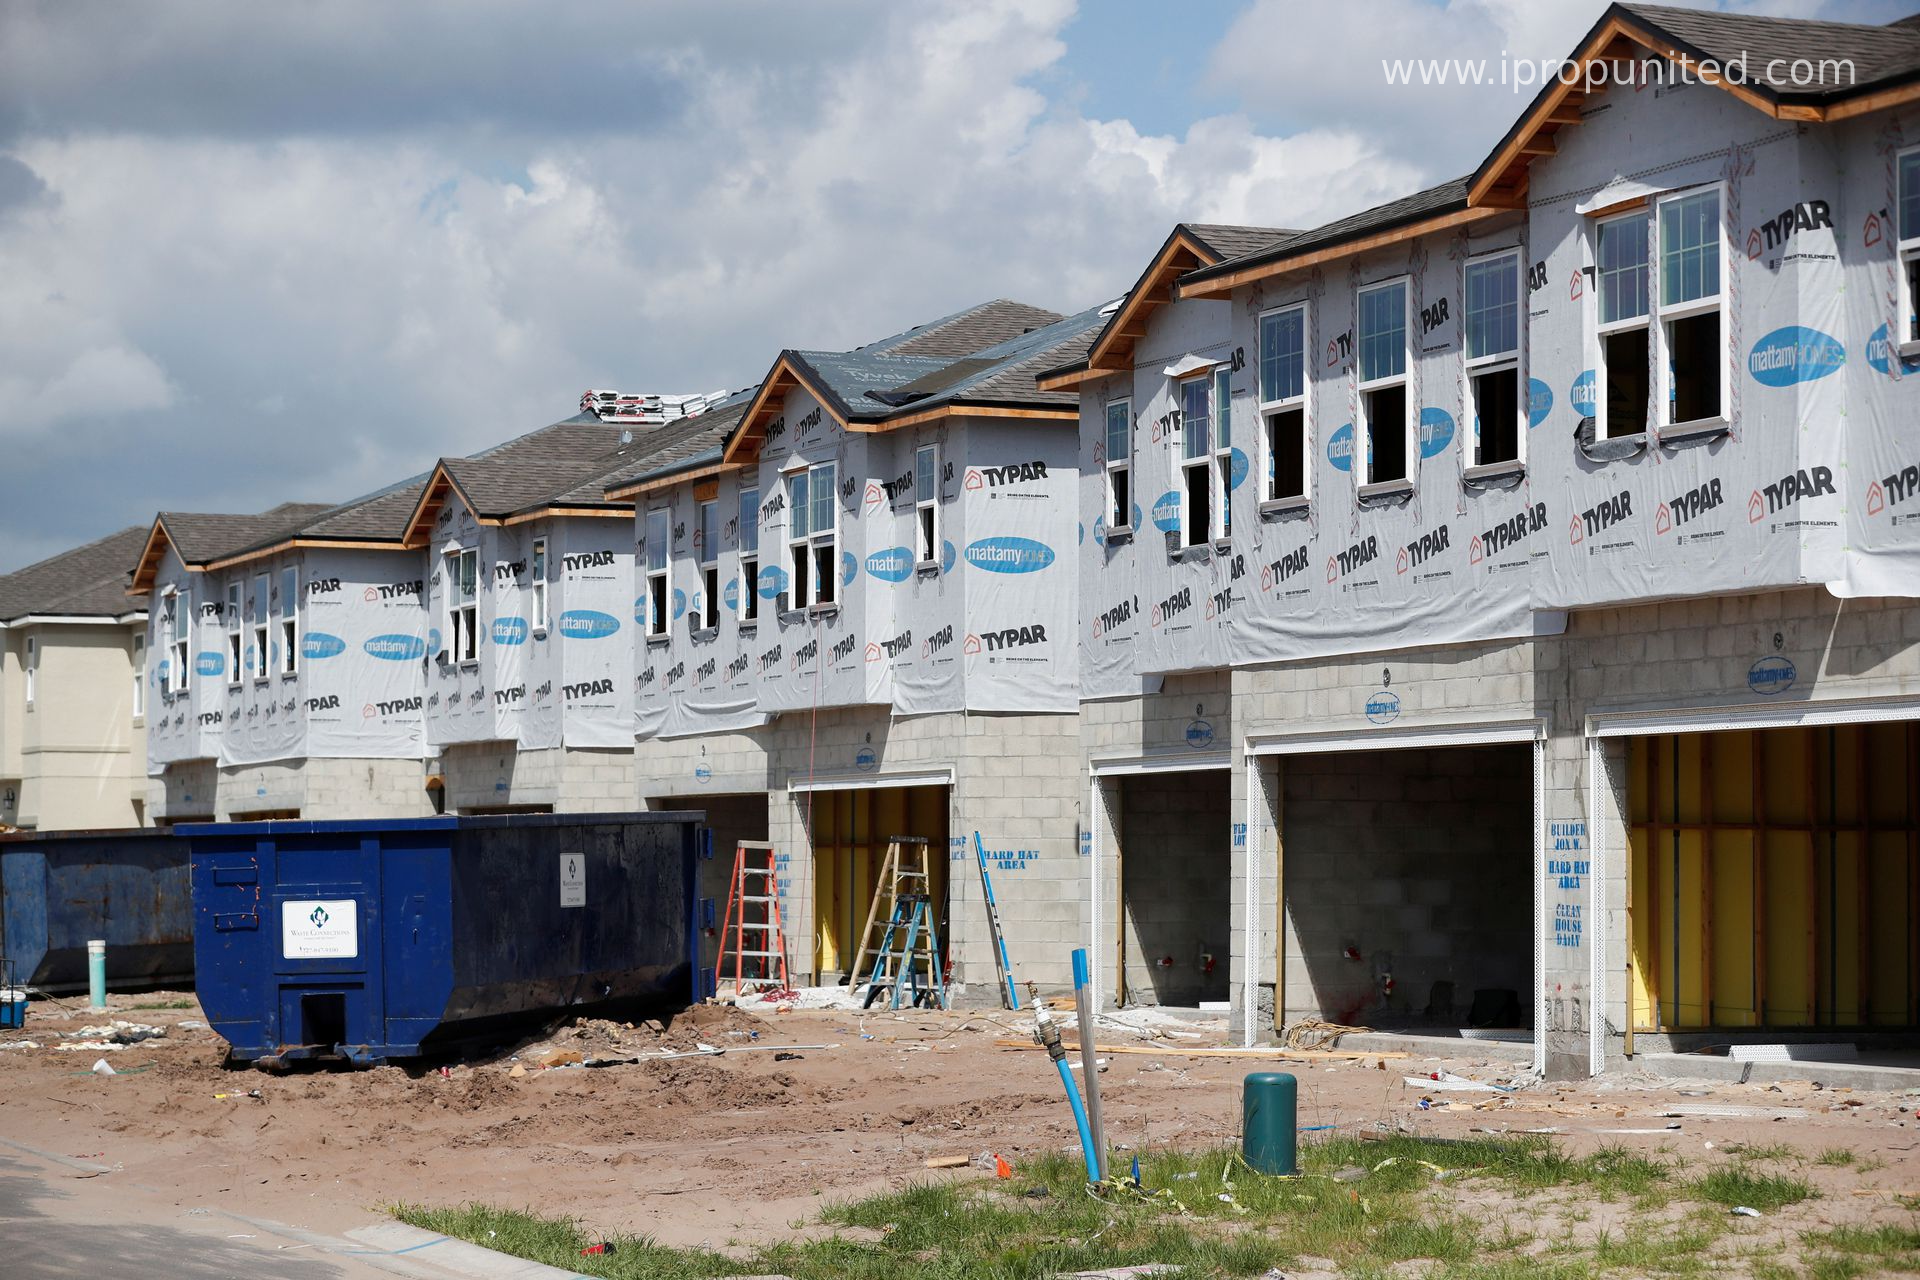 U.S. homebuilding fell due to shortages of inputs